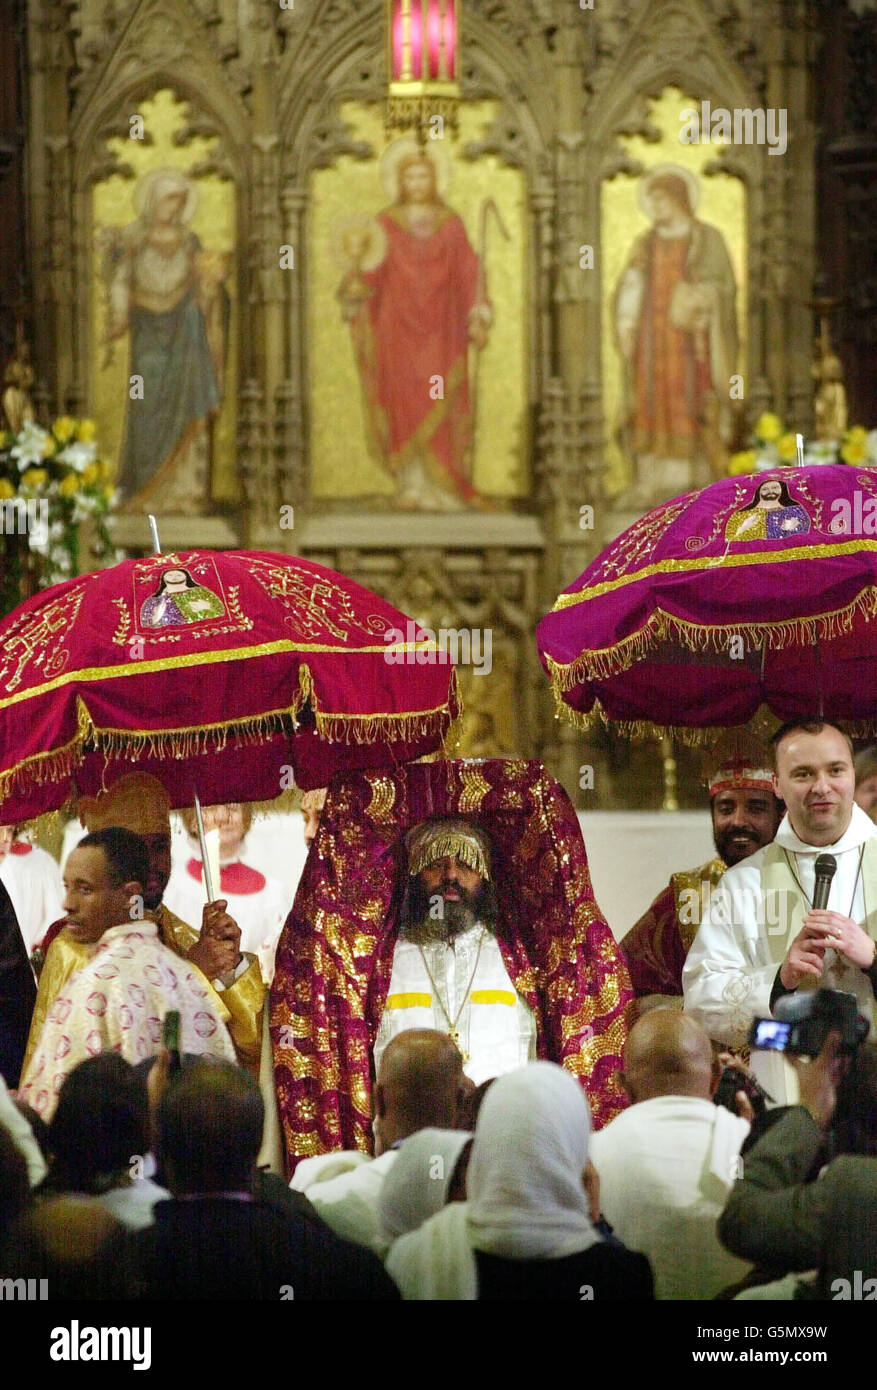 Ethiopian priest Arch Mandrite Abba Markos (C), carries the Tabot, wrapped in ceremonial clothes, on his head during the handing over ceremony for the sacred artefact at St John's Scottish Episcopal church in Edinburgh. * A group of Ethiopian priests and officials arrived in the UK to retrieve the sacred carving stolen from their country 130 years ago. The wooden tablet depicting the Ark of the Covenant, known as a Tabot, was seized by British soldiers during a bloody battle in Ethiopia in 1868 when an expeditionary force was sent to the African country. The Tabot was brought to the Princes Stock Photo